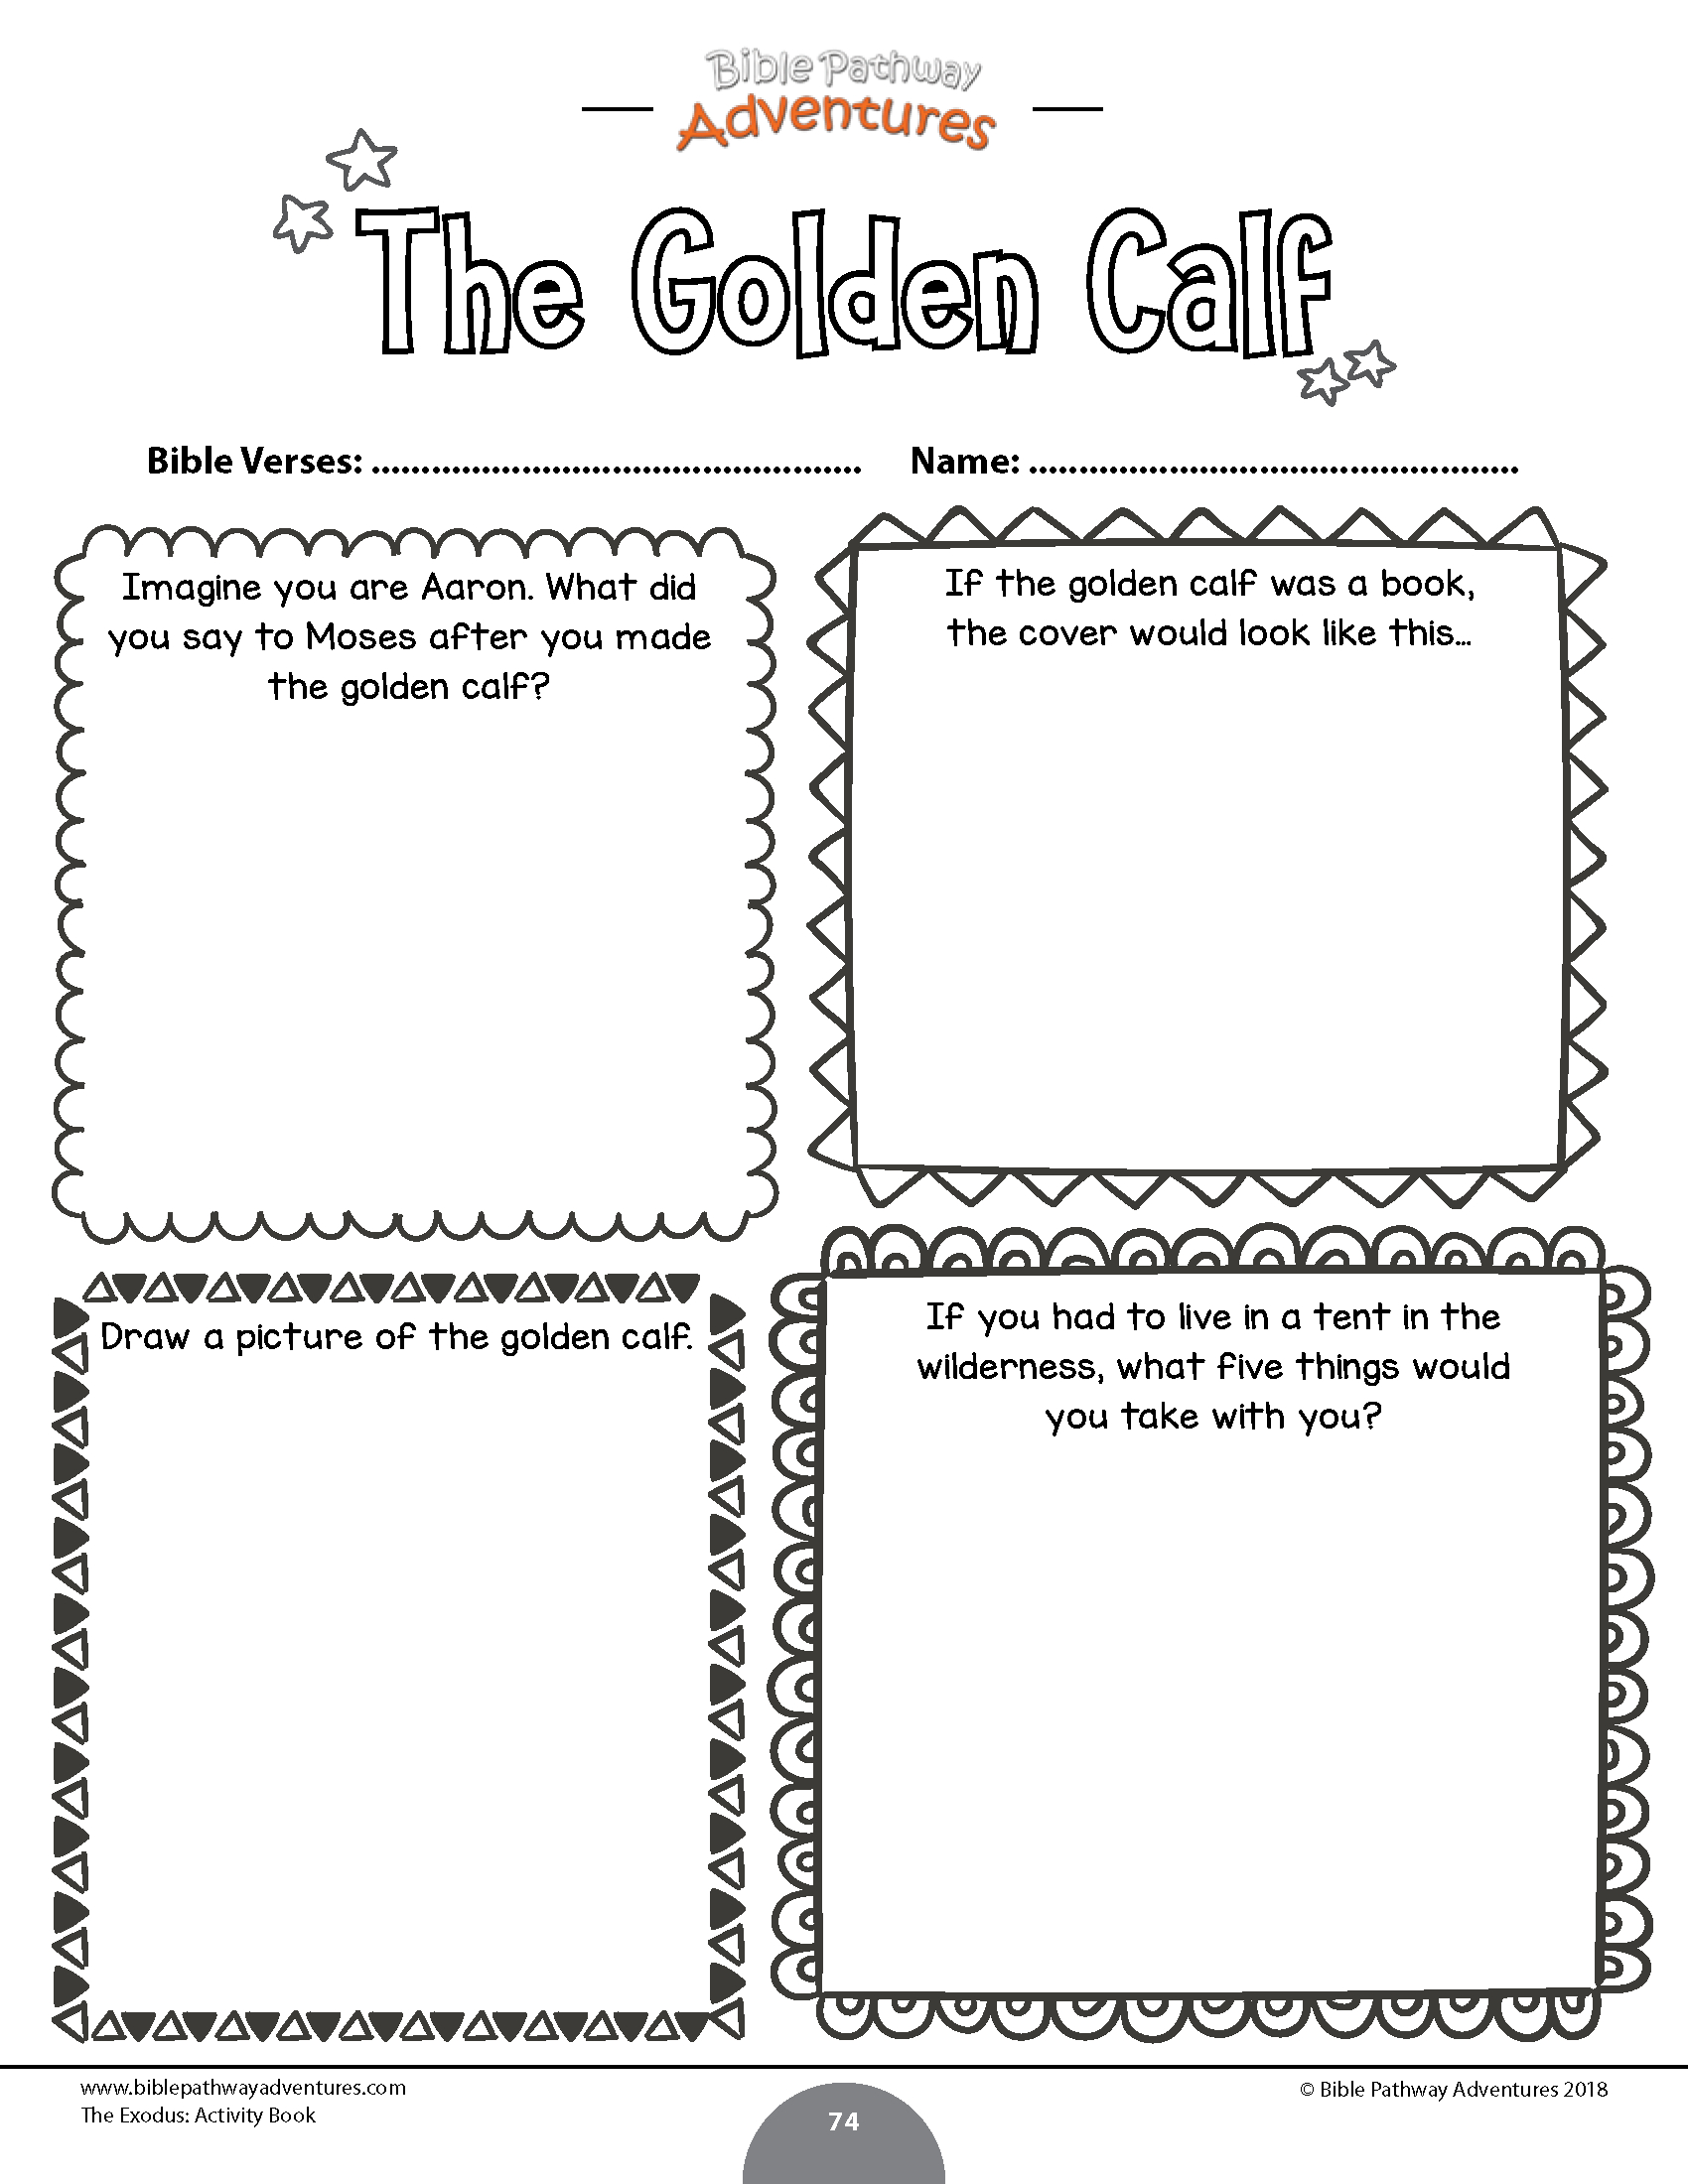 The Golden Calf Coloring Page The Exodus Activity Book Kids Ages 6 12 Bible Pathway Adventures